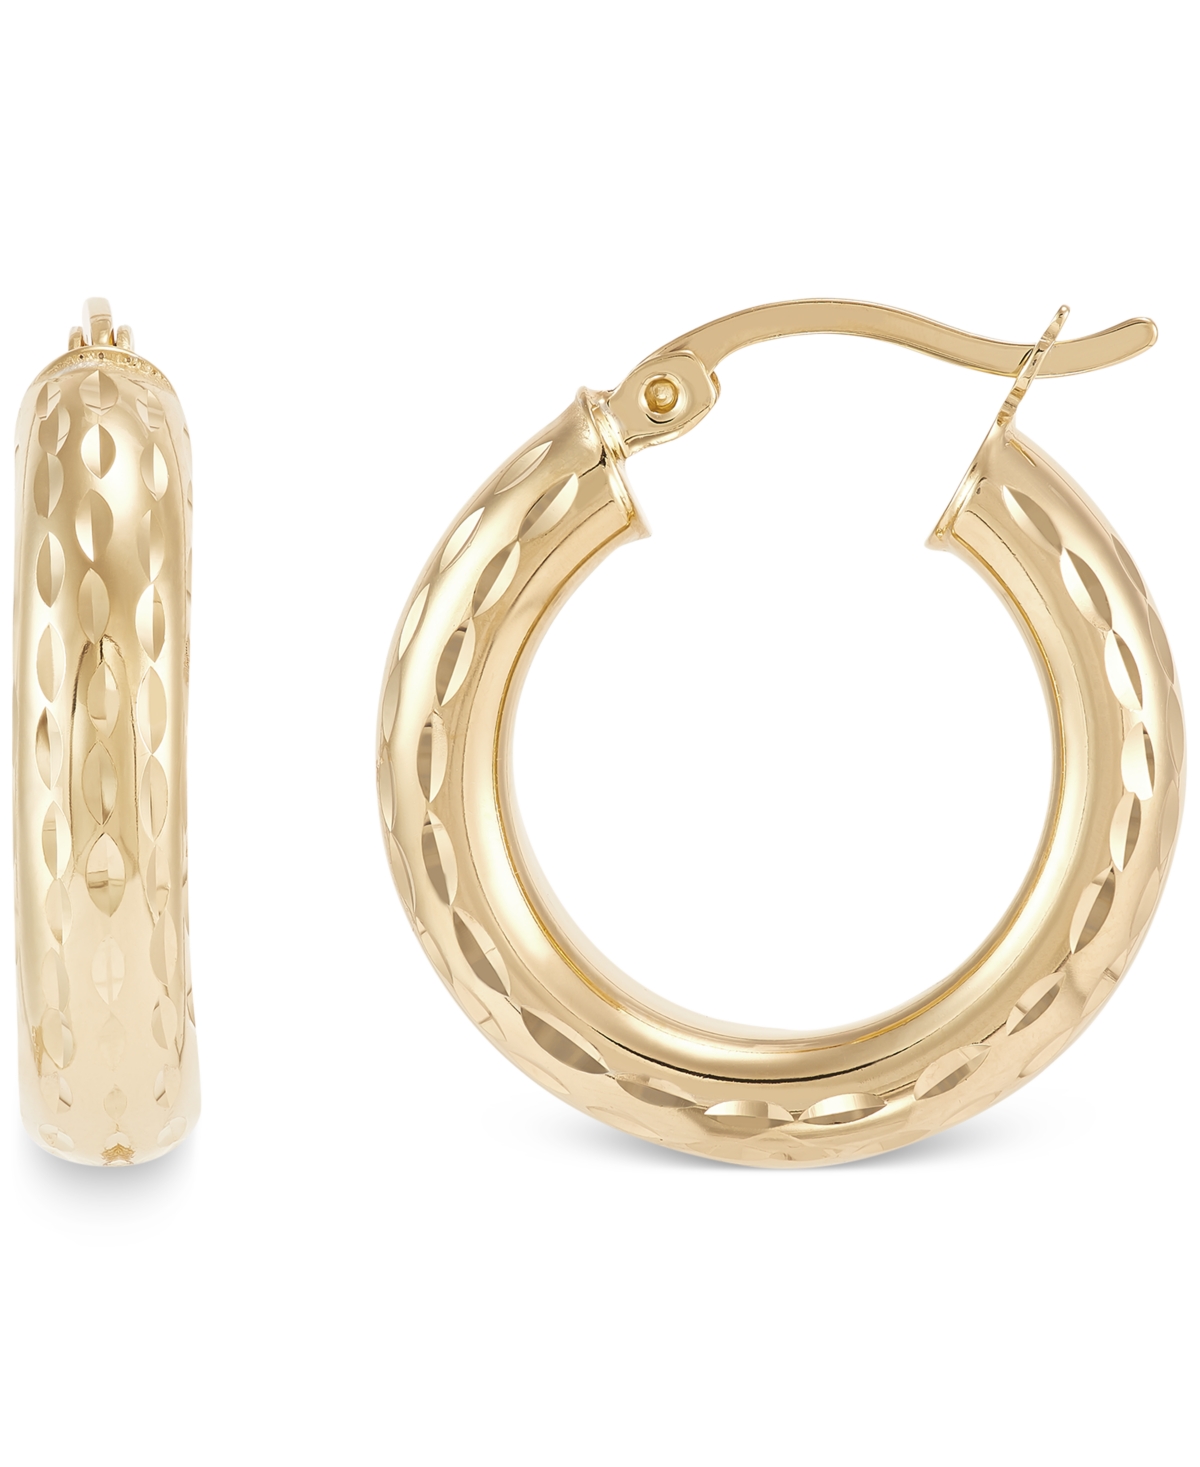 Giani Bernini Textured Tube Small Hoop Earrings, 20mm, Created For Macy's In Gold Over Silver